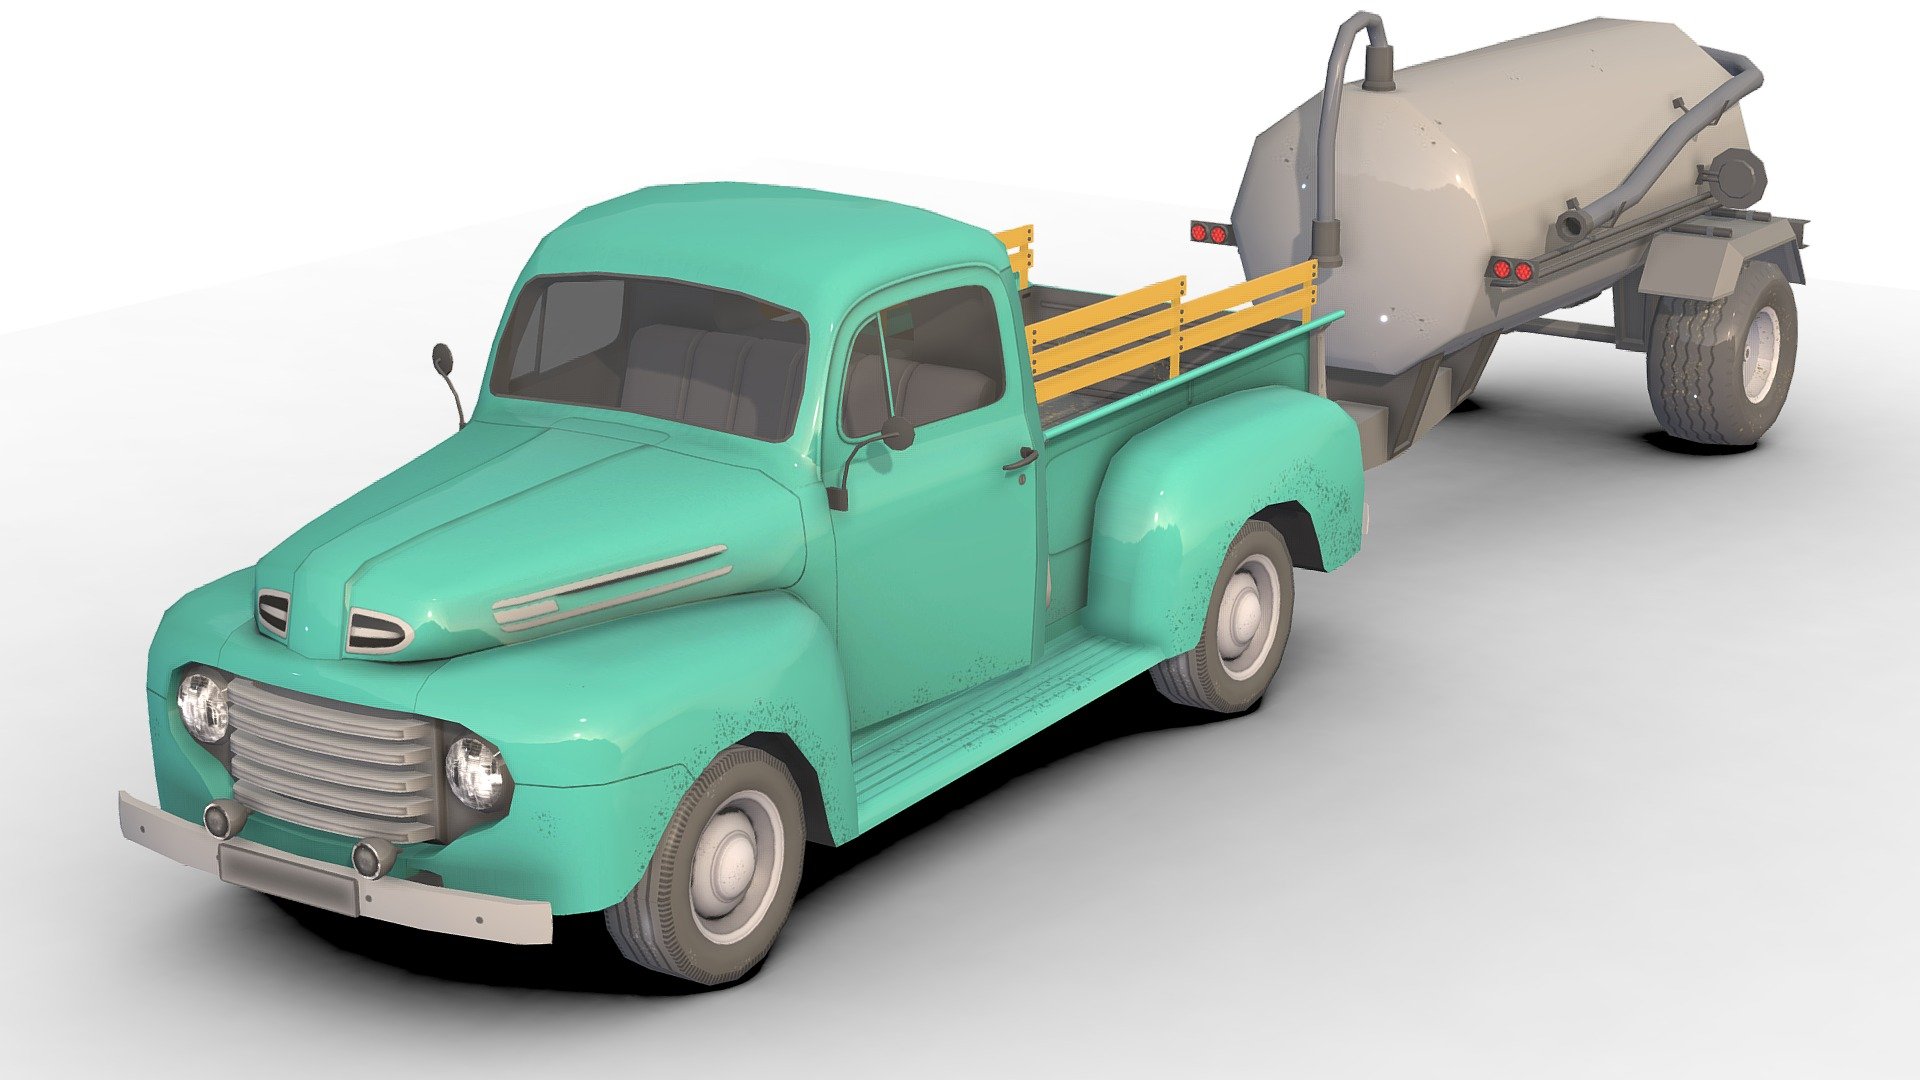 Farm Car  Low_Poly .

You can use these models in any game and project.

This model is made with order and precision.

Separated parts (bodys . wheels . Steer . Bulldozers ).

Very Low- Poly.

Truck have separate parts.

Average poly count: 14,000 tris.

Texture size: 2048 / 1024 (PNG).

Number of textures: 3.

Number of materials: 4.

Format: Fbx / Obj / 3DMax .

The original files are in the Additional file .

Wait for my new models.. Your friend (Sidra) 3d model